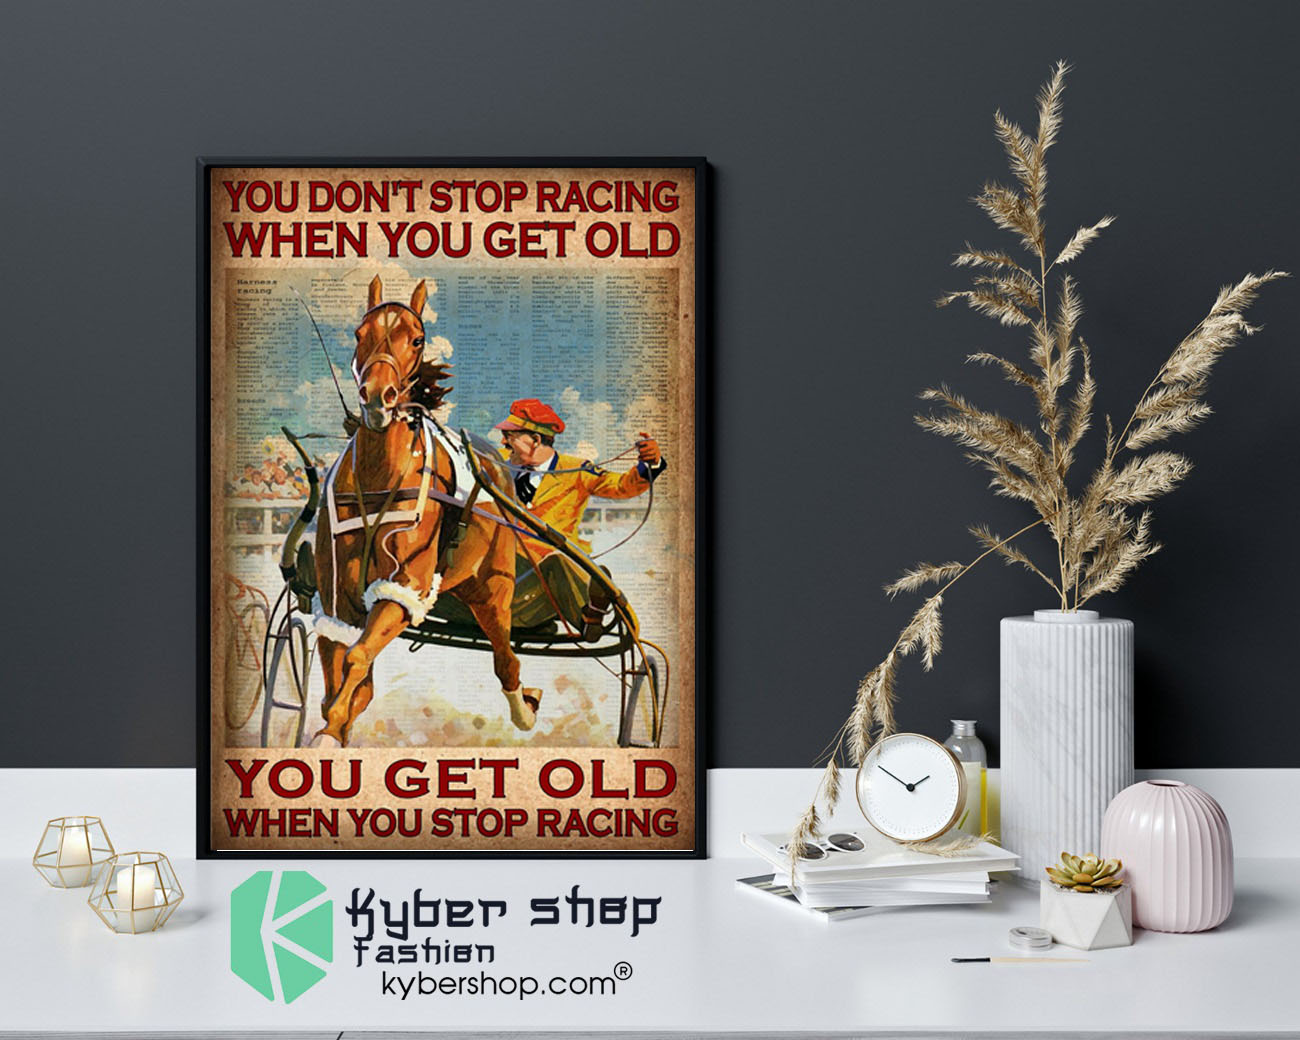 You don’t stop racing when you get old poster